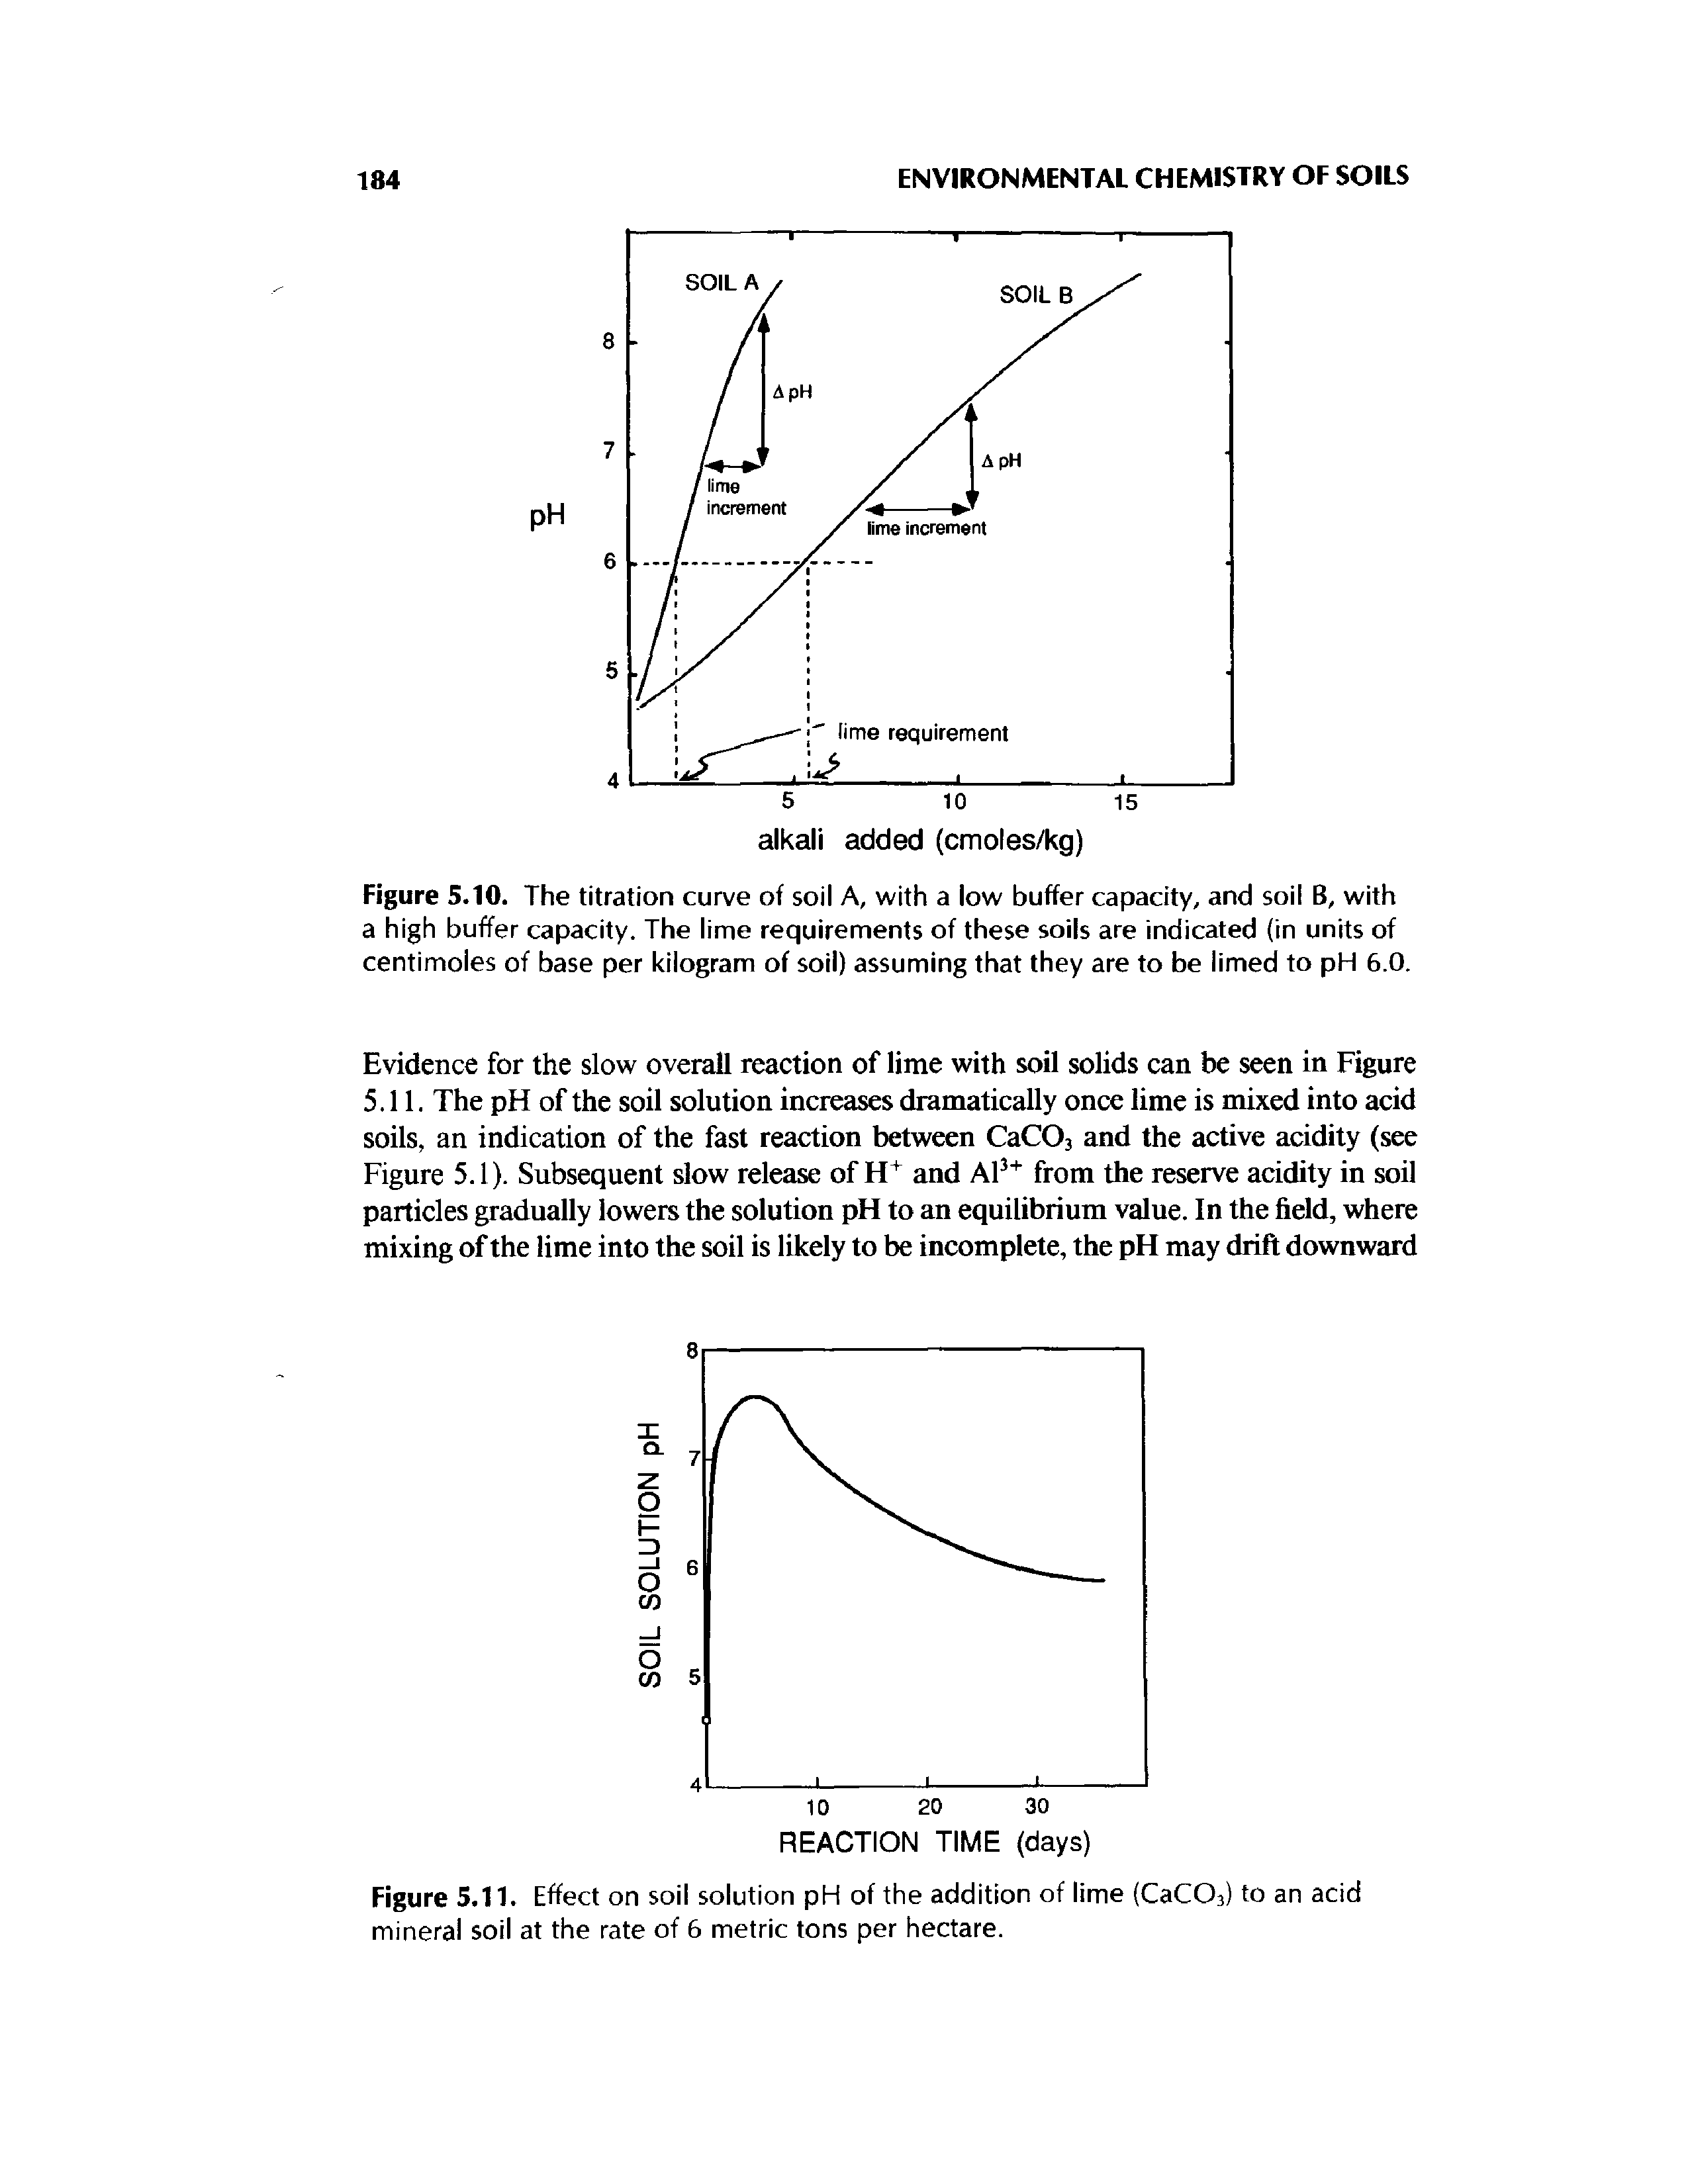 Figure 5.10. The titration curve of soil A, with a low buffer capacity, and soil B, with a high buffer capacity. The lime requirements of these soils are indicated (in units of centimoles of base per kilogram of soil) assuming that they are to be limed to pH 6.0.